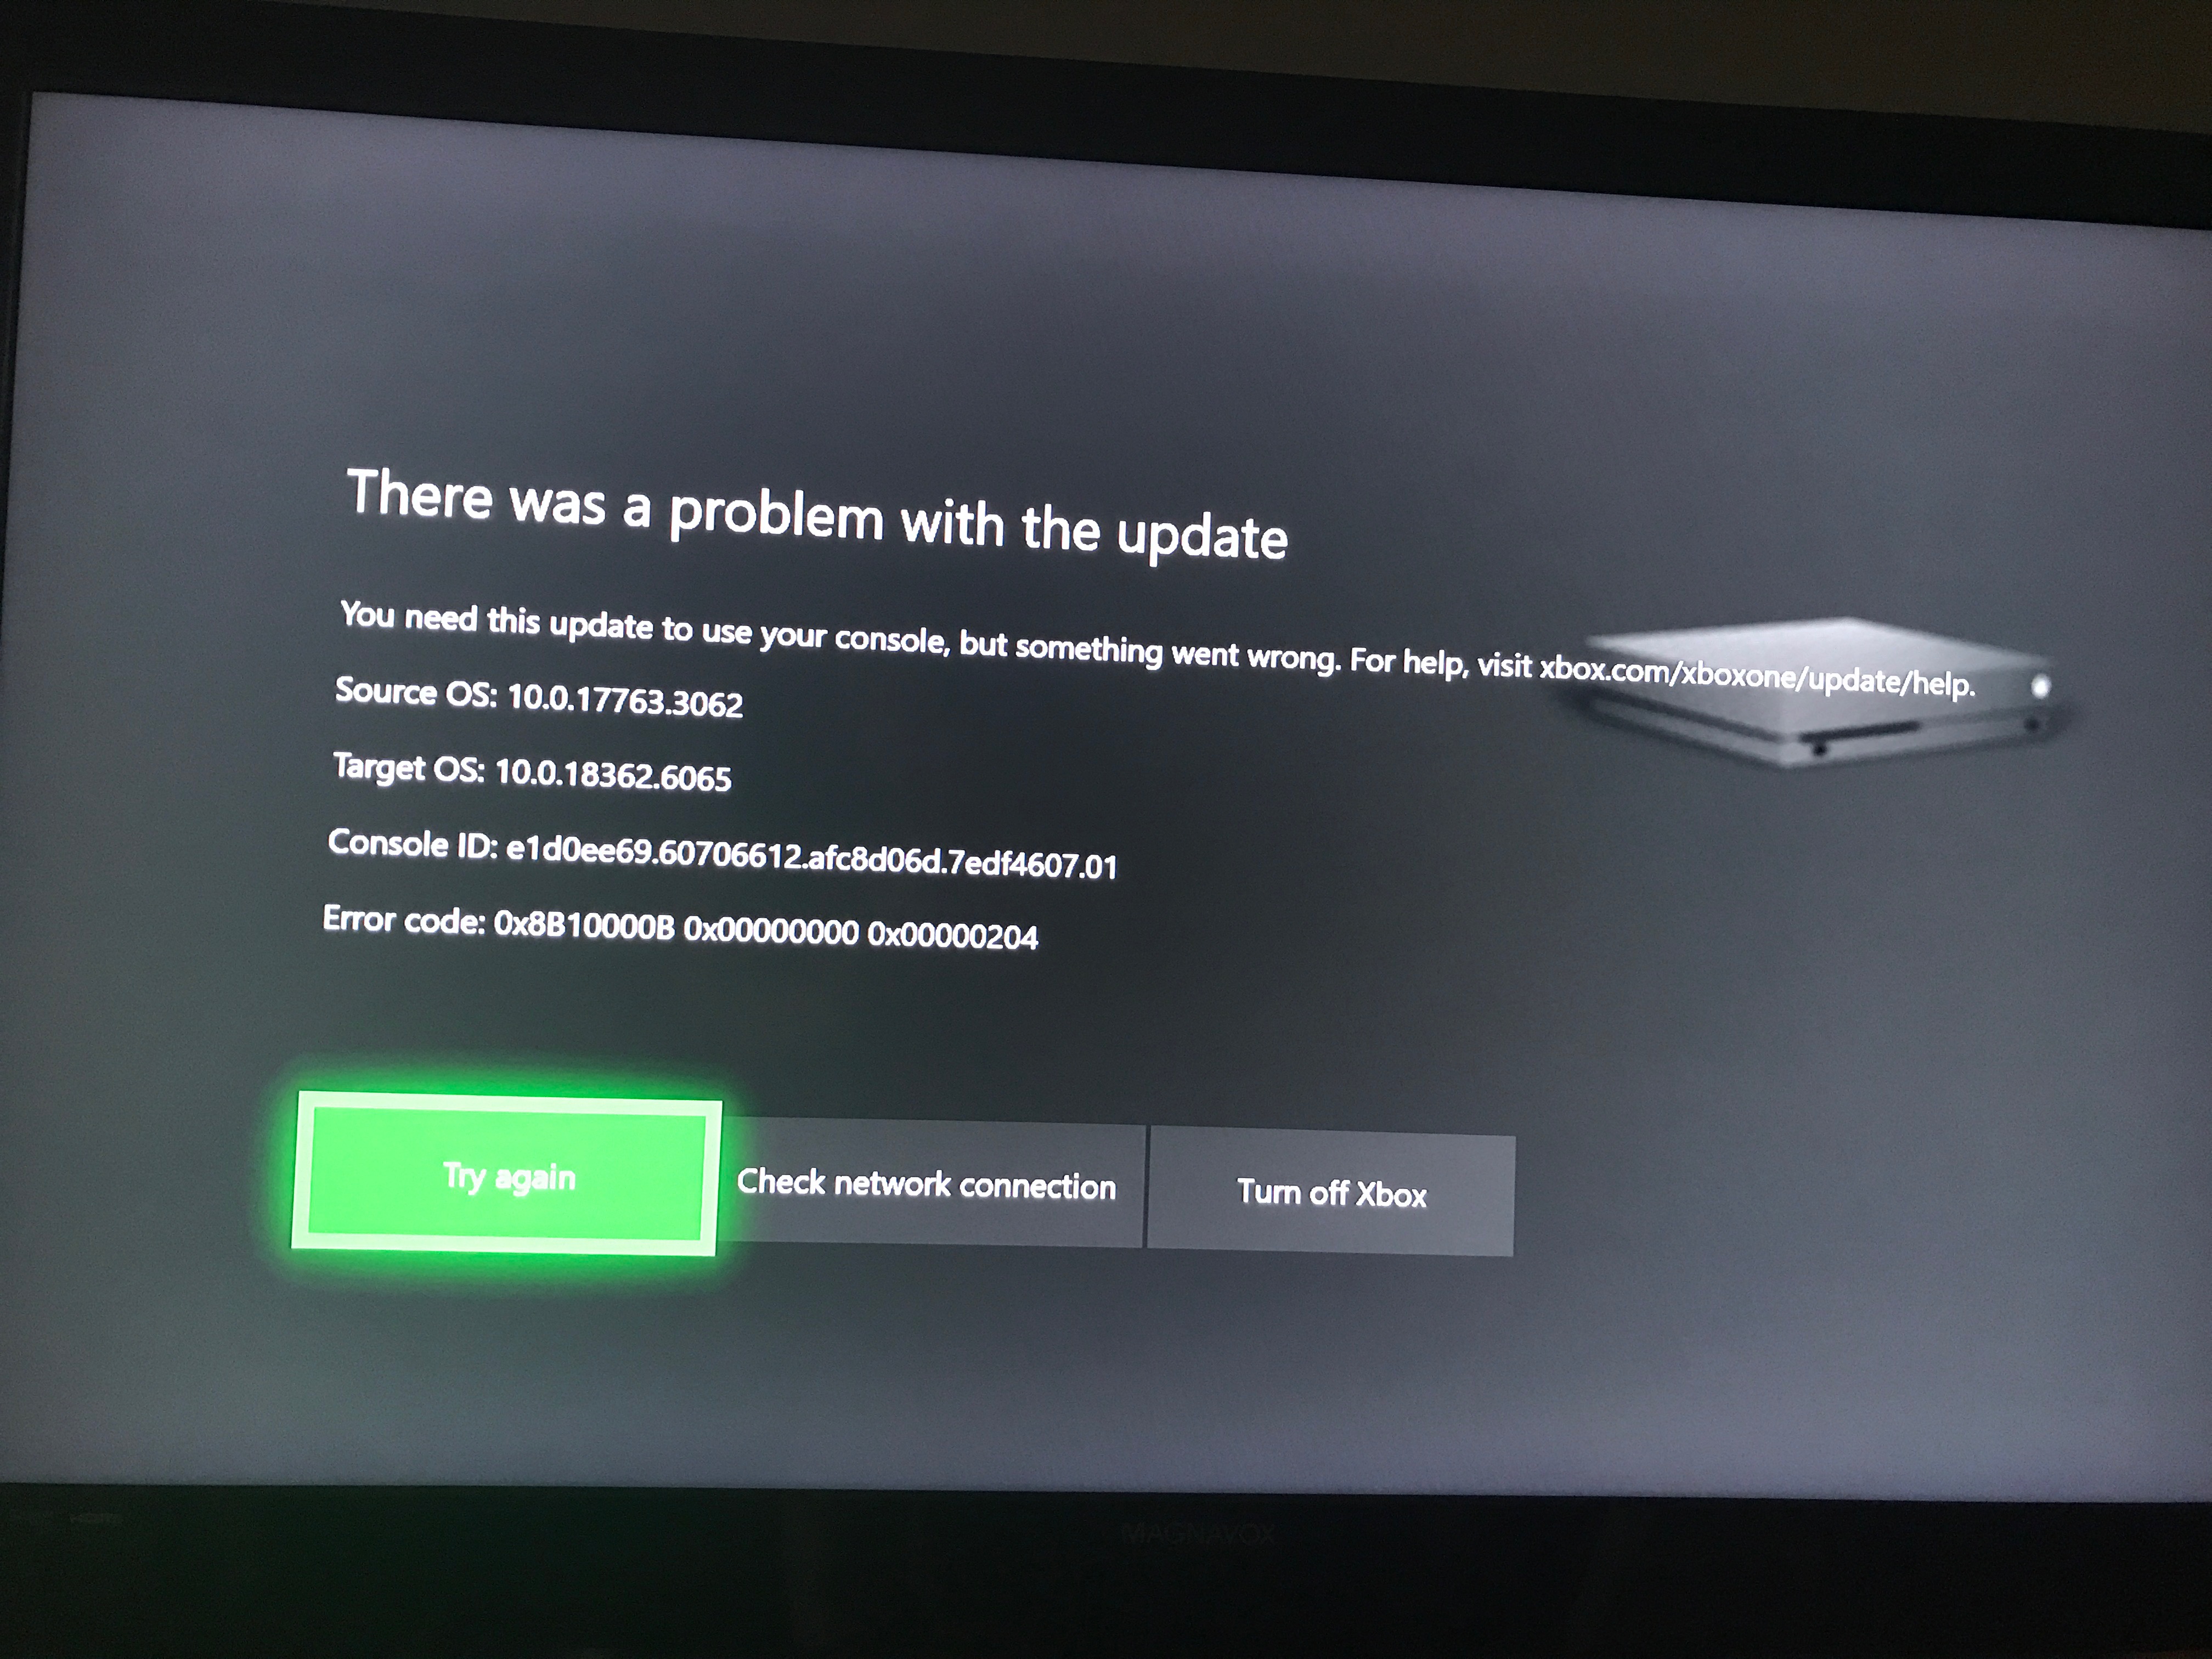 Xbox One X initial setup "There was problem with the update" - Community